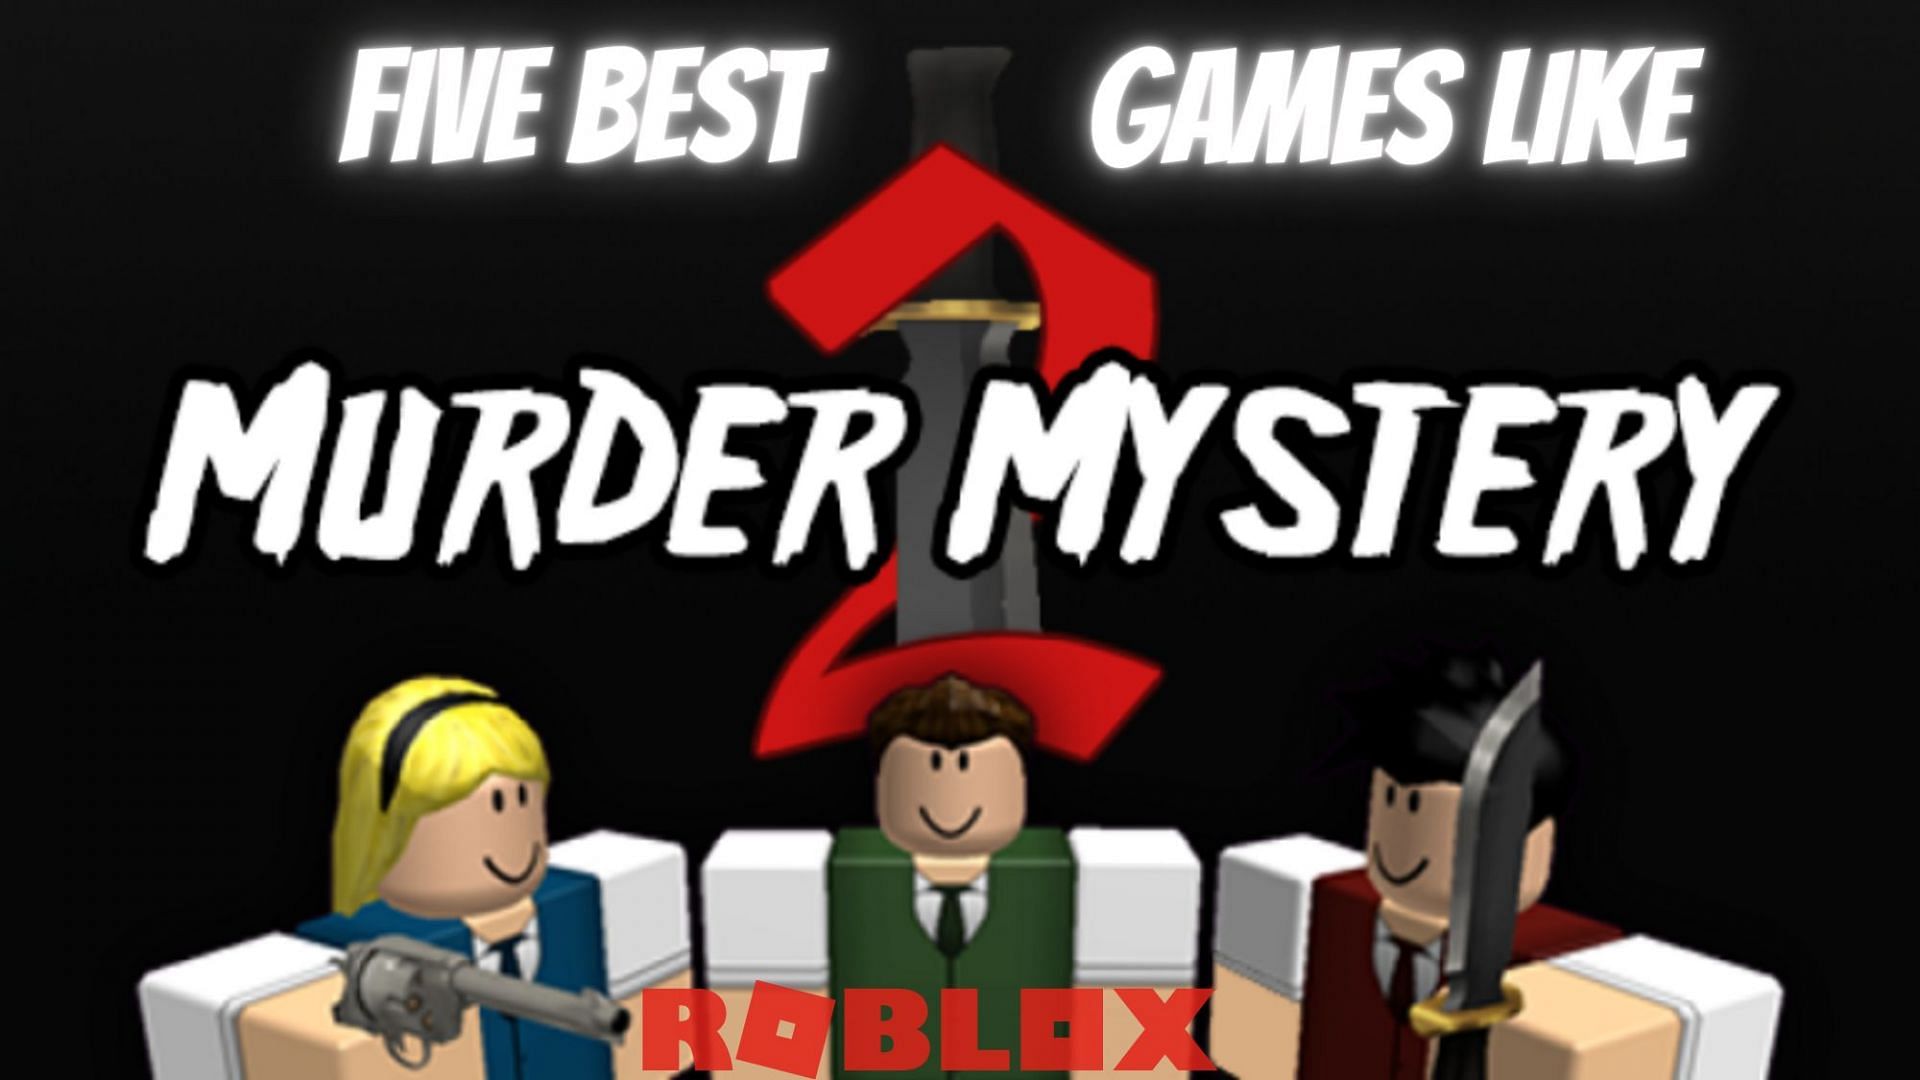 THE DEAD ROBLOX PLAYERS!!(Rip) 